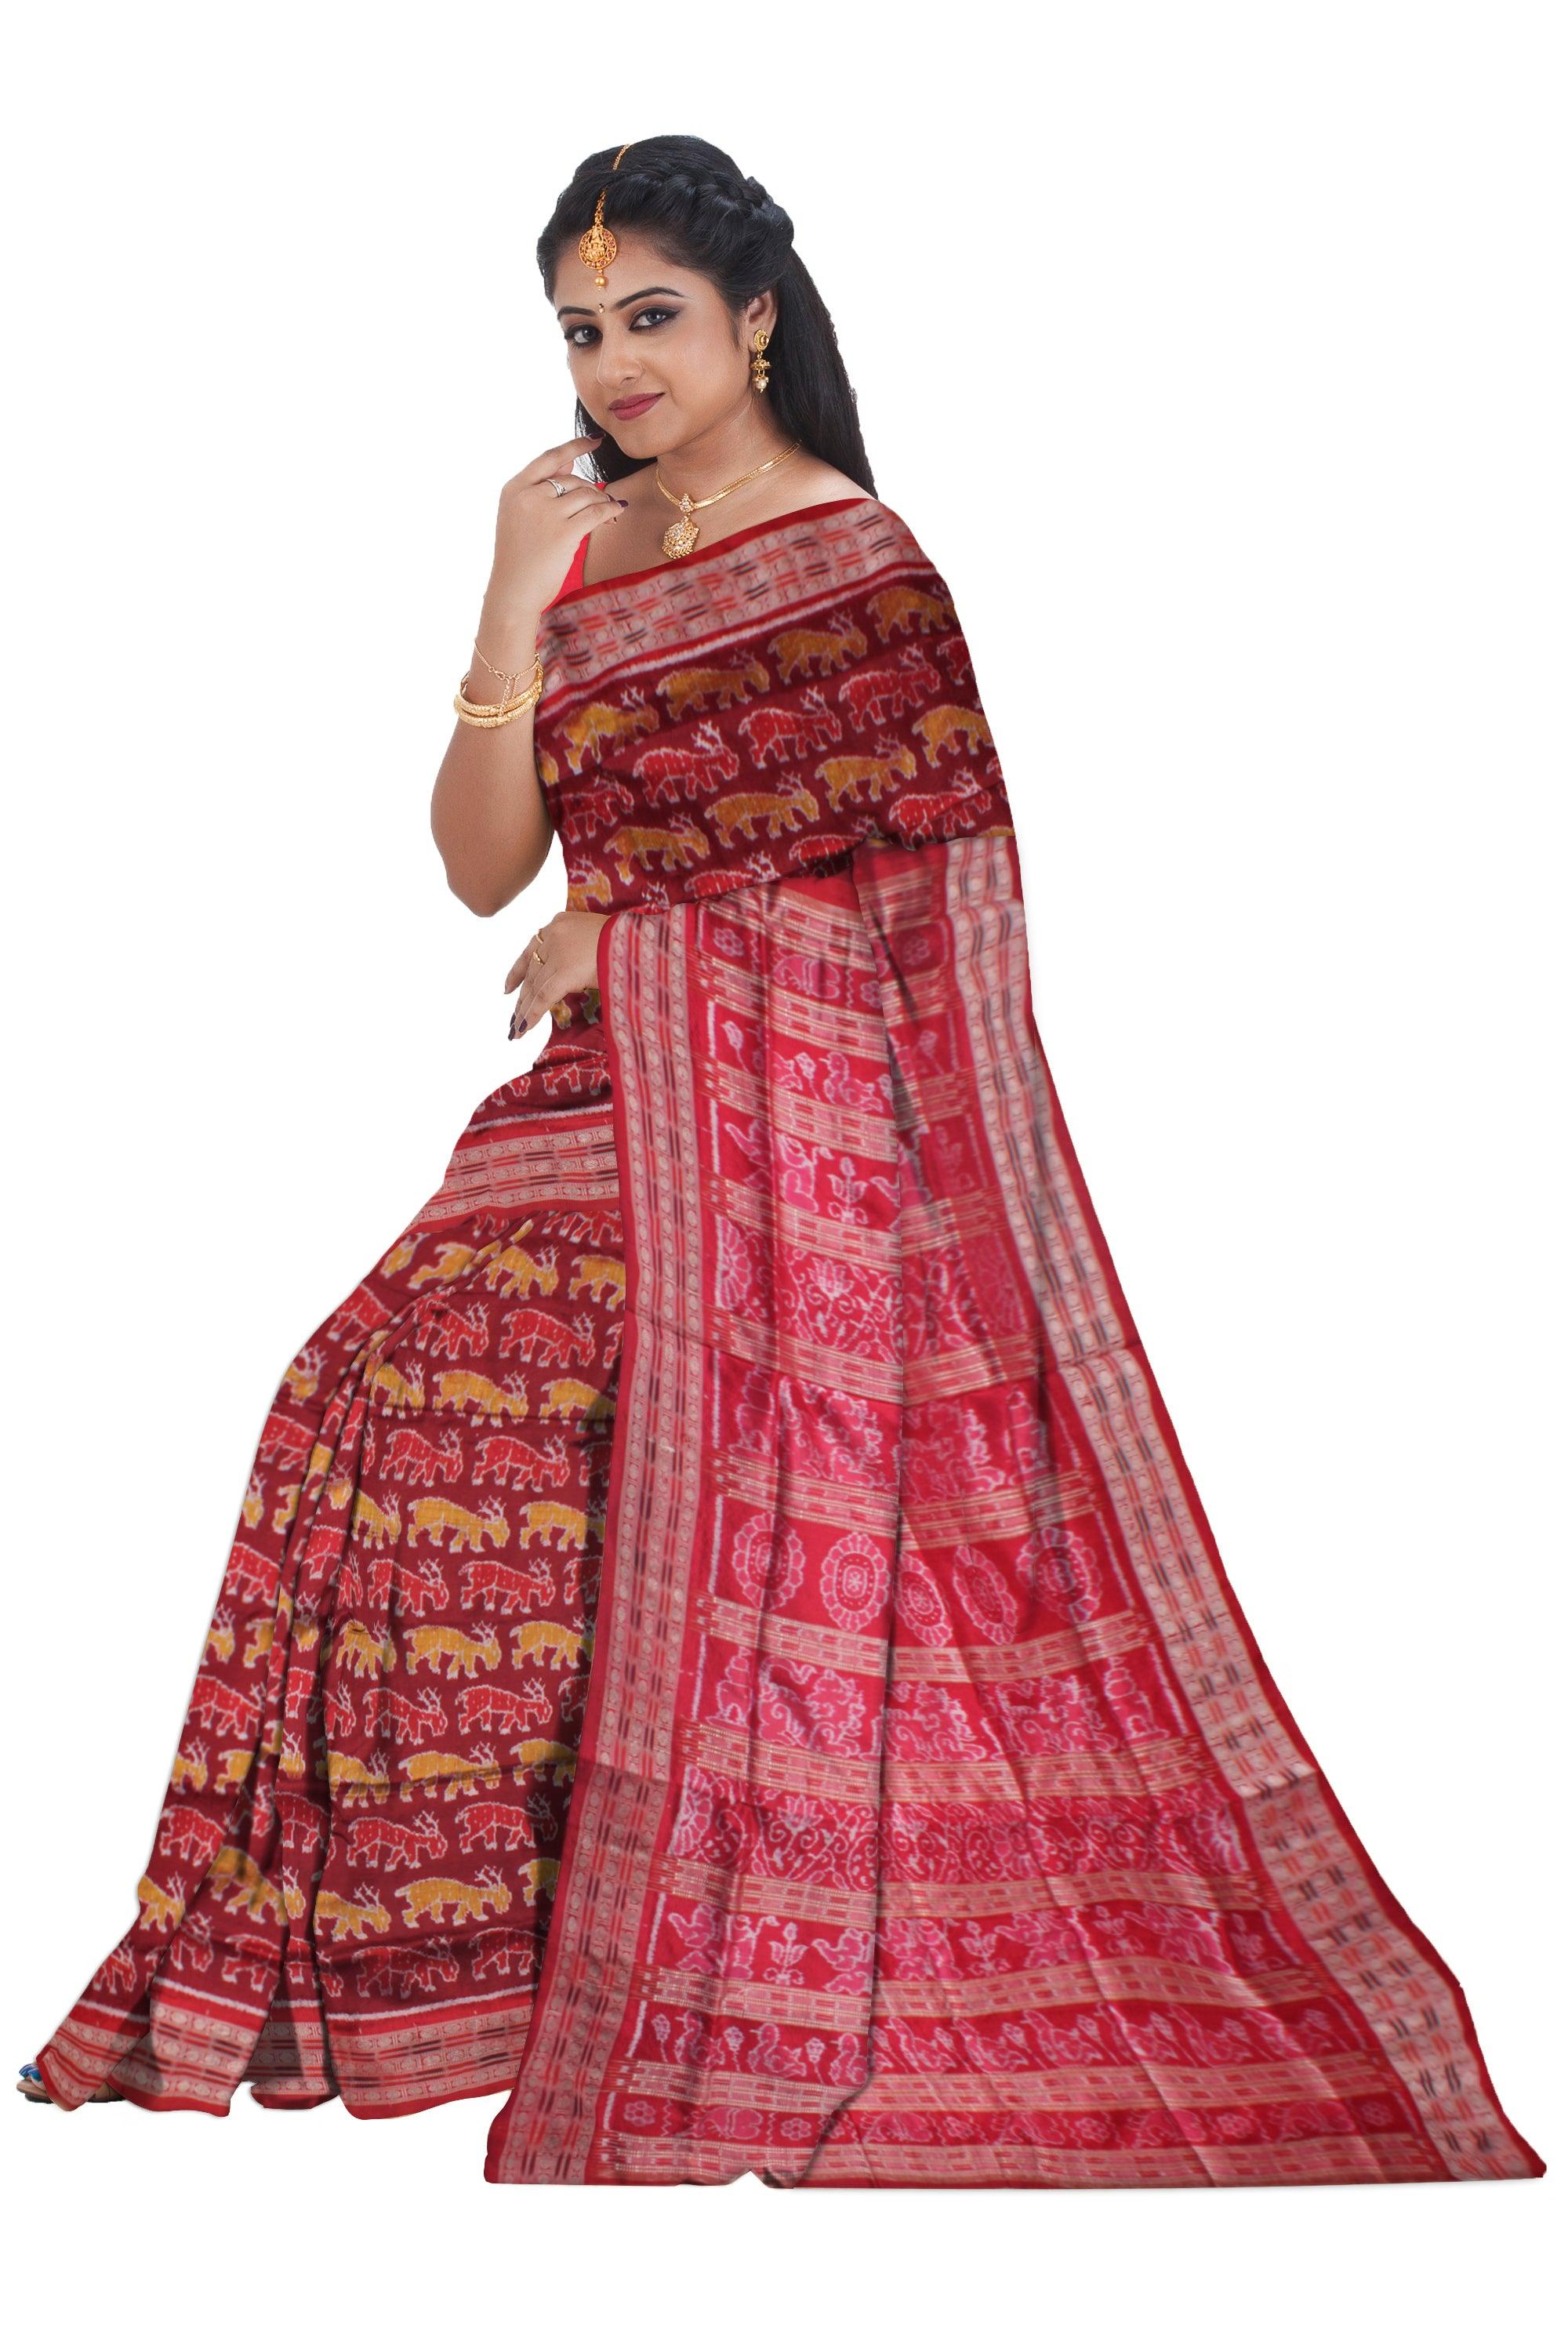 NEW ARRIVAL DEER PATTERN PURE SILK SAREE IS MAROON AND RED COLOR BASE, AVAILABLE WITH MATCHING BLOUSE PIECE. - Koshali Arts & Crafts Enterprise